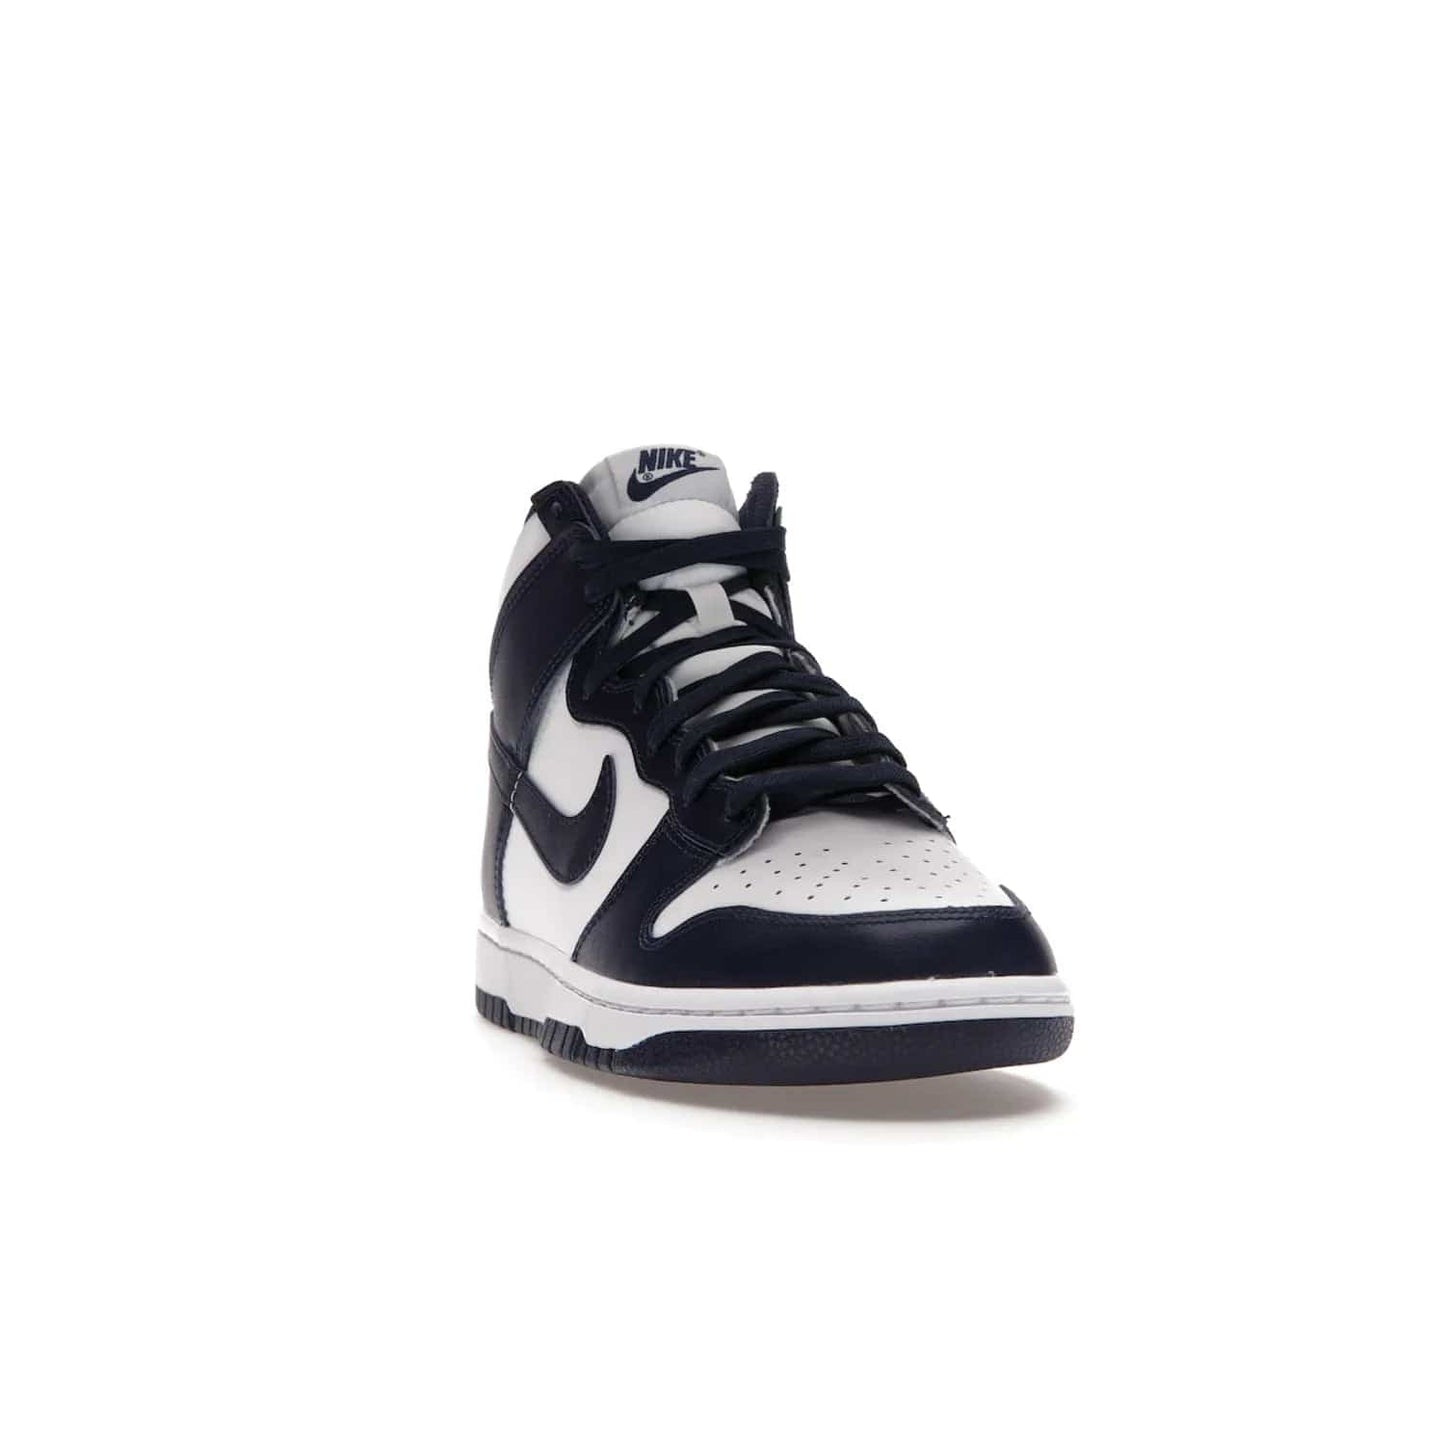 Nike Dunk High Championship Navy - Image 8 - Only at www.BallersClubKickz.com - Classic Nike Dunk High sneaker delivers an unforgettable style with white leather upper, Championship Navy overlays, and matching woven tongue label and sole. Make a statement with the Championship Navy today.